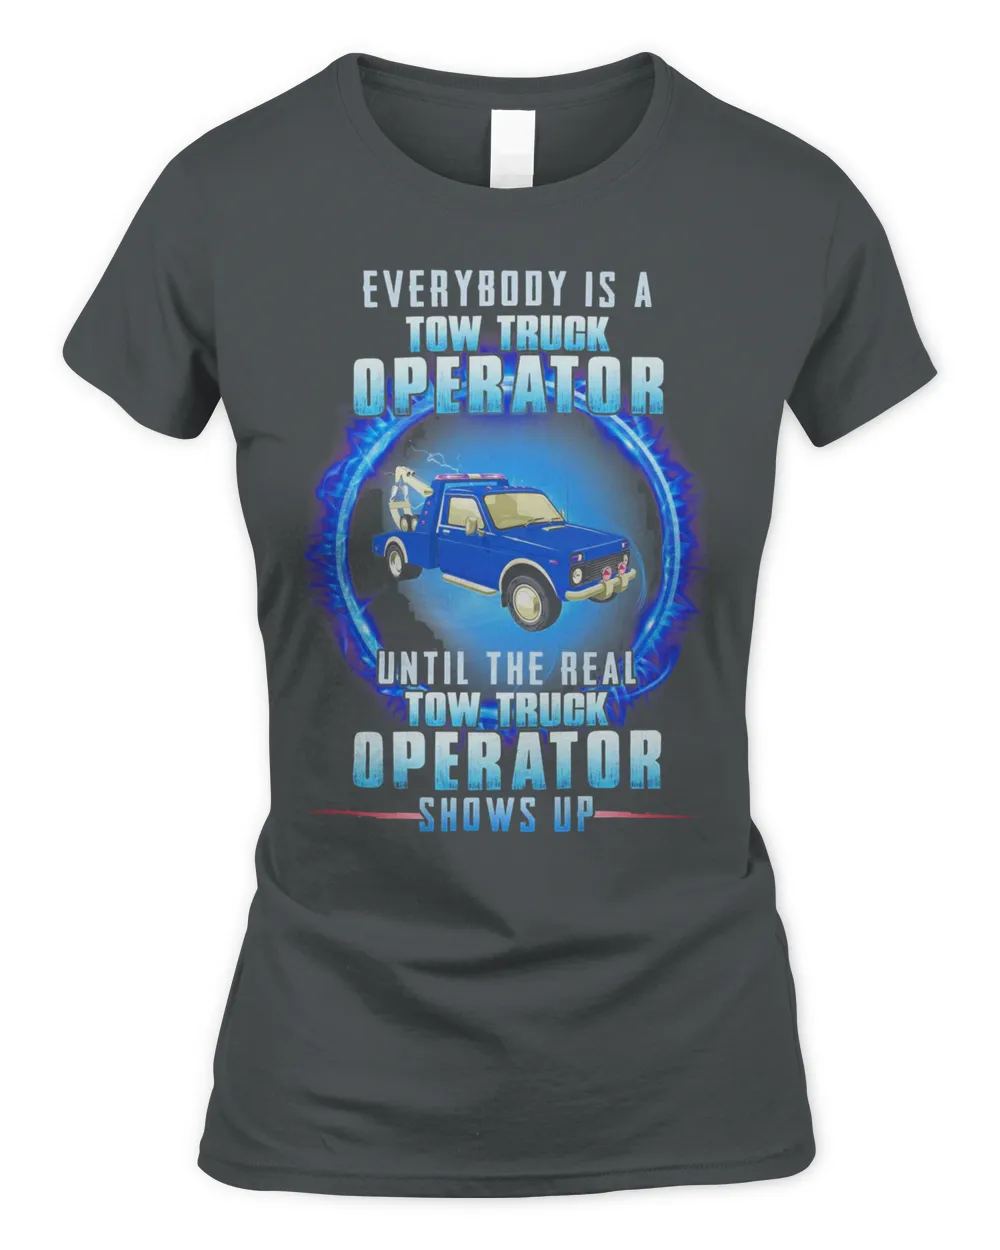 Everybody Is A Tow Truck Operator Until The Real Tow Truck Operator Shows Up Shirt